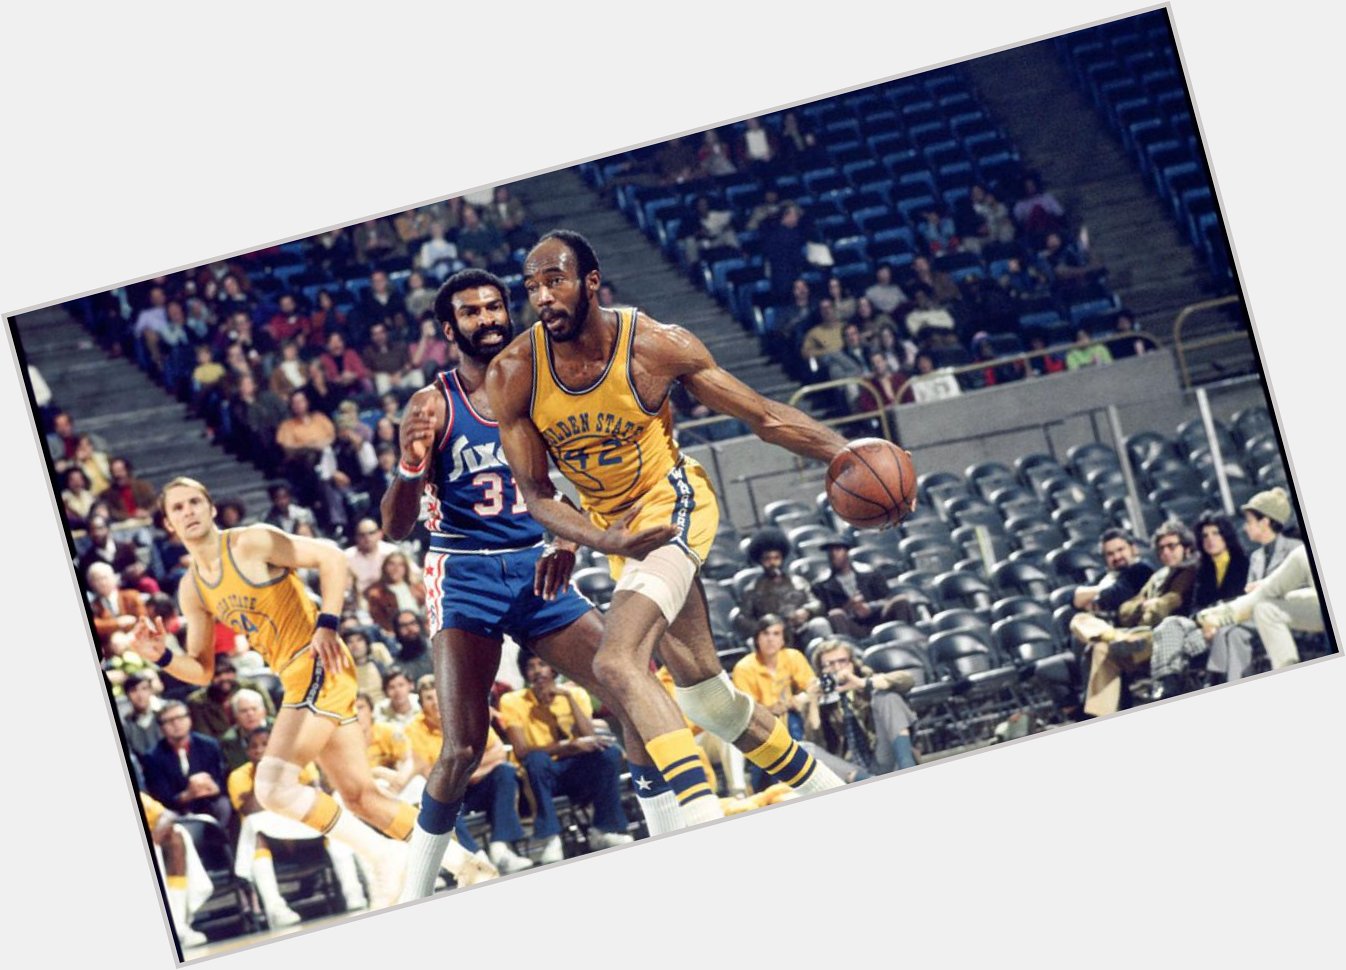 Happy Birthday Nate Thurmond! Thurmond would have been 77 today. 